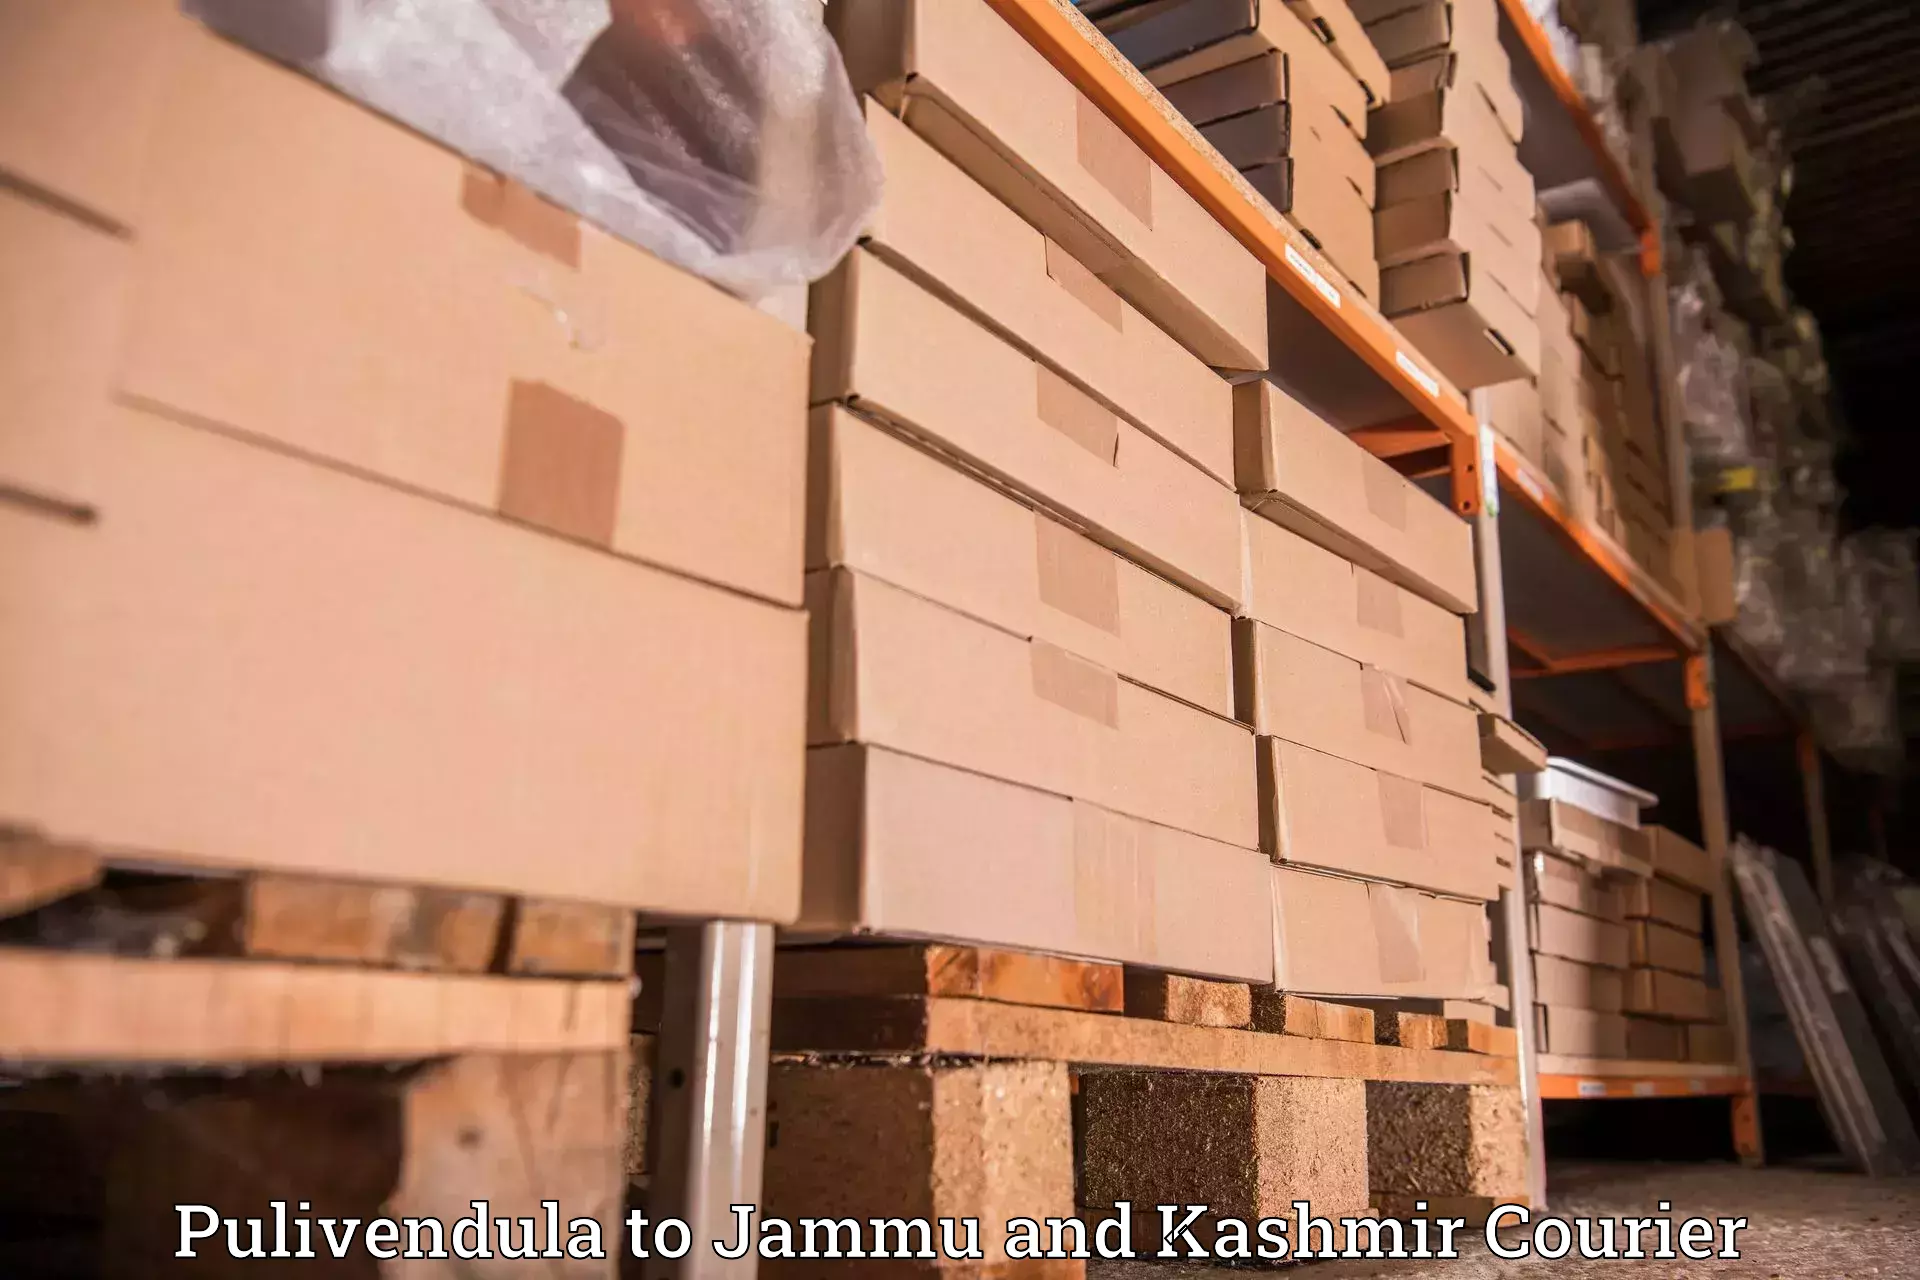 Efficient shipping operations Pulivendula to Jammu and Kashmir